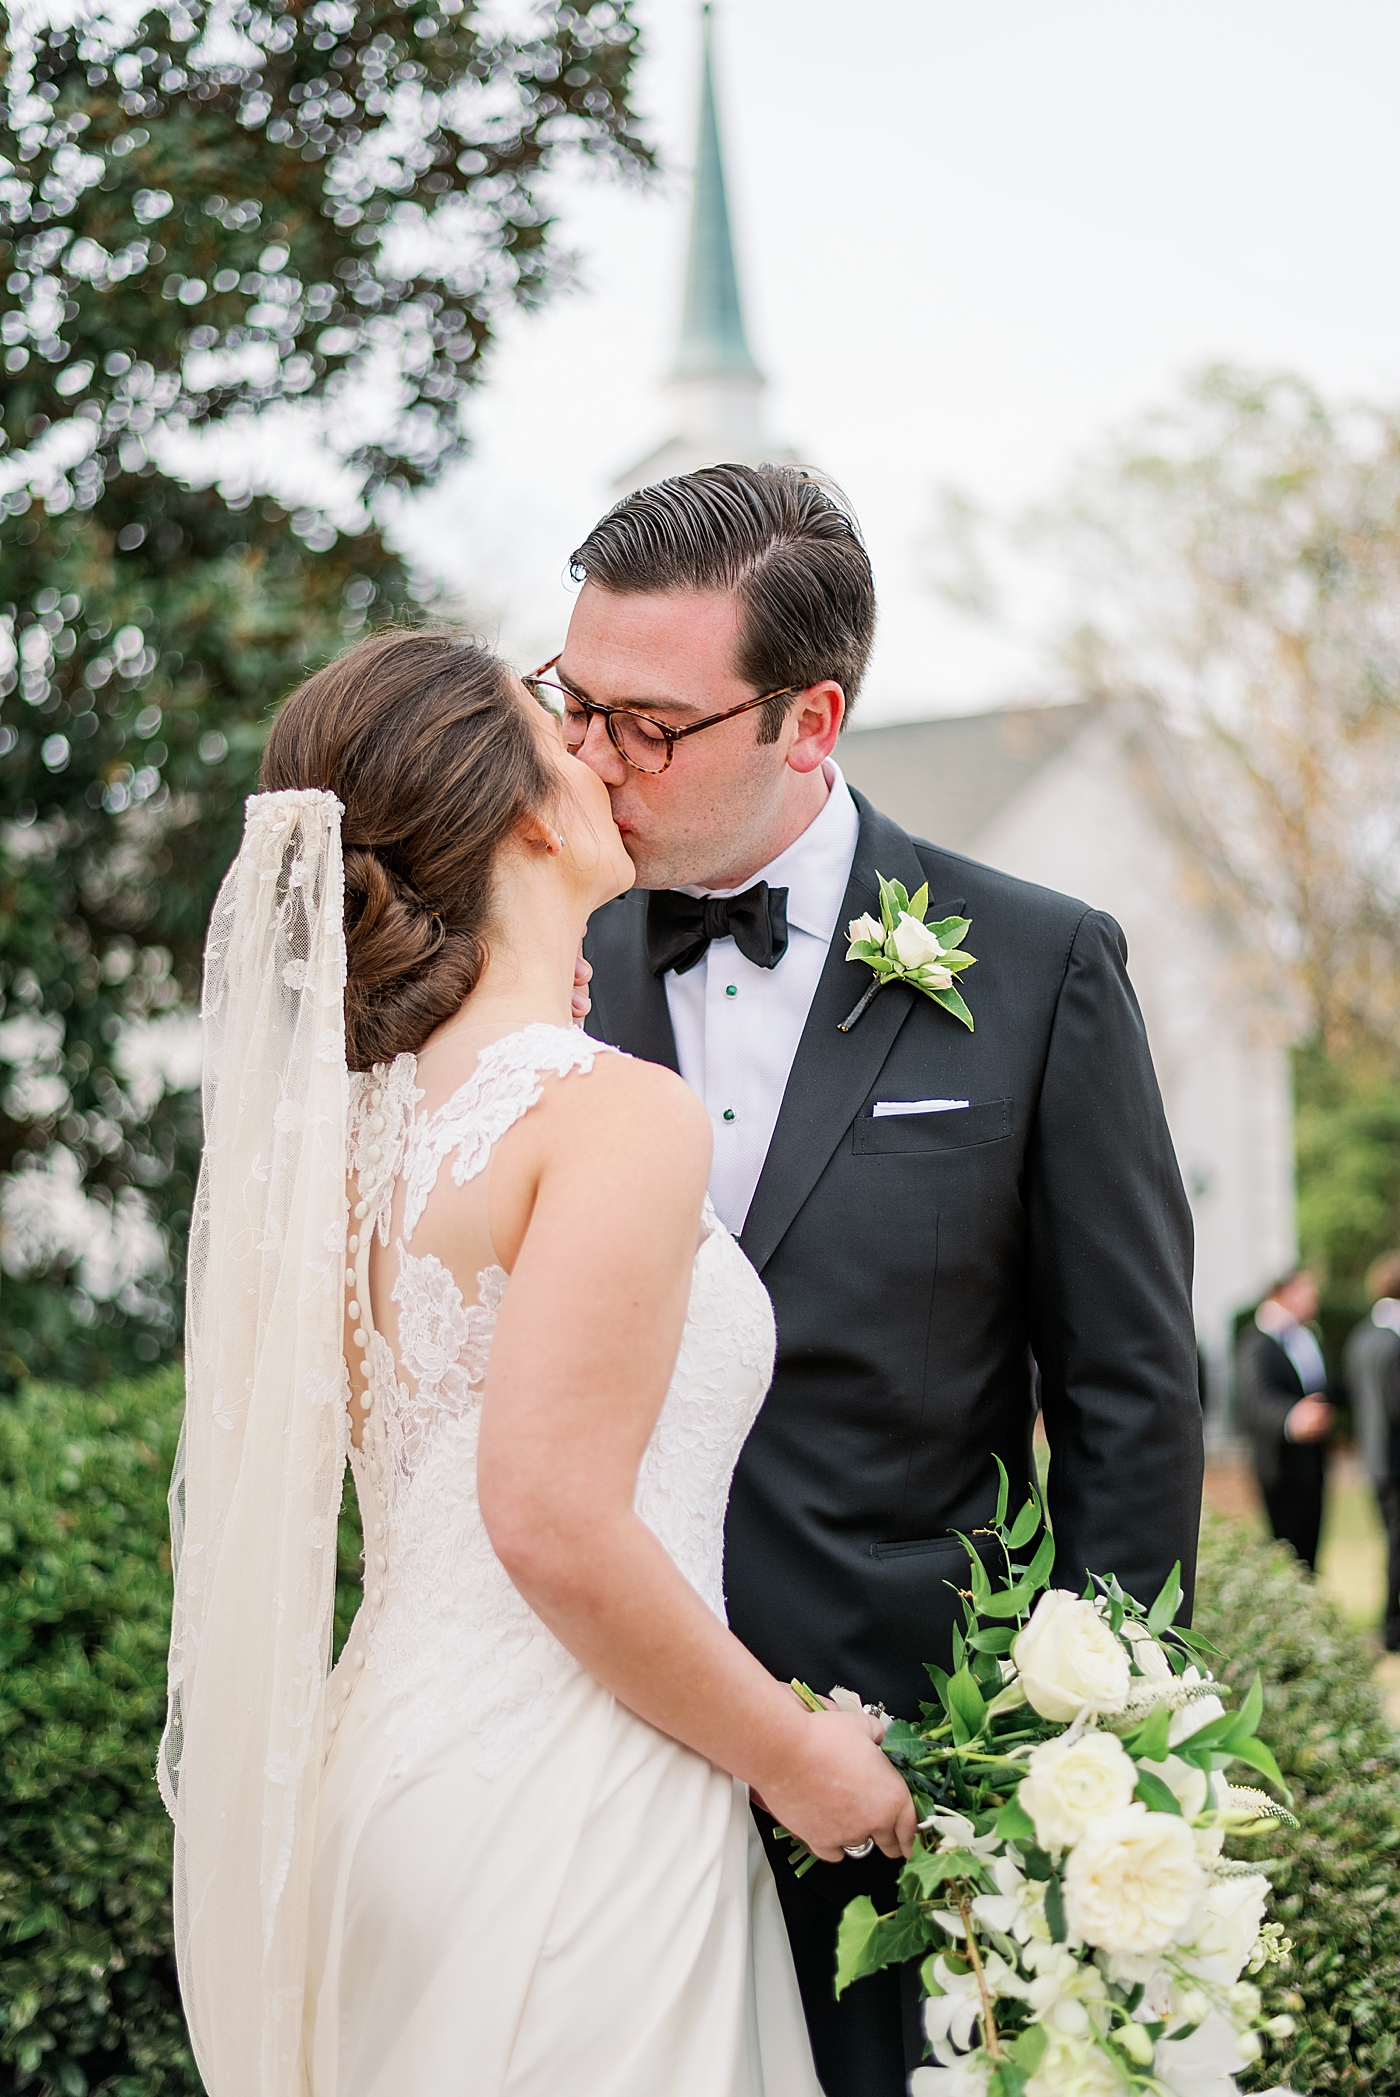 Bride and groom kissing after their wedding | Photo by Annie Laura Photography